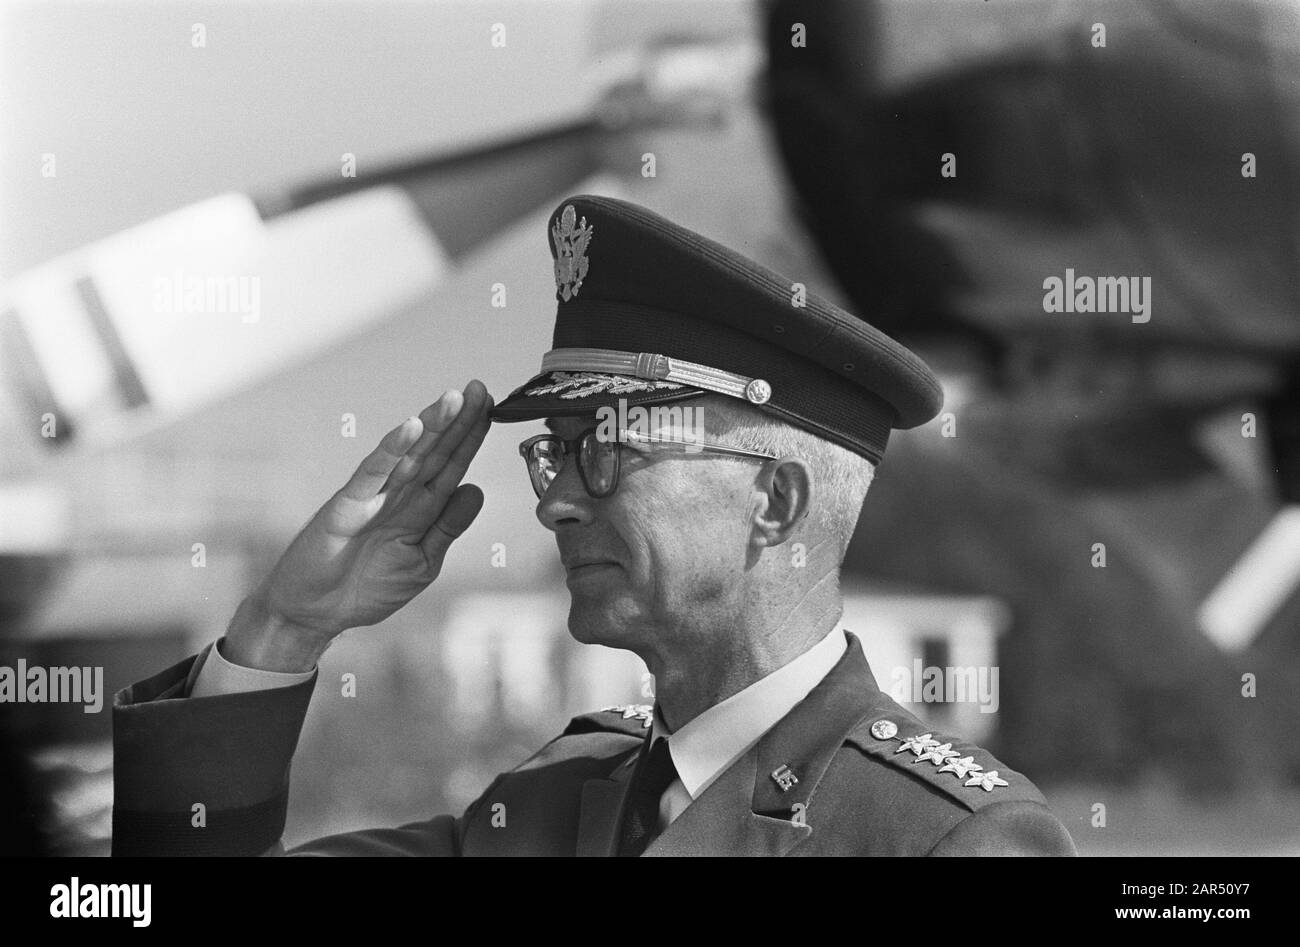 General A. J. Goodpaster, commander in chief of the Allied forces in Europe, arrives at Ypenburg: General Goodpaster, headline Date: 8 September 1969 Location: The Hague, Ypenburg, South -Holland Keywords: generals, commanders in chief Stock Photo